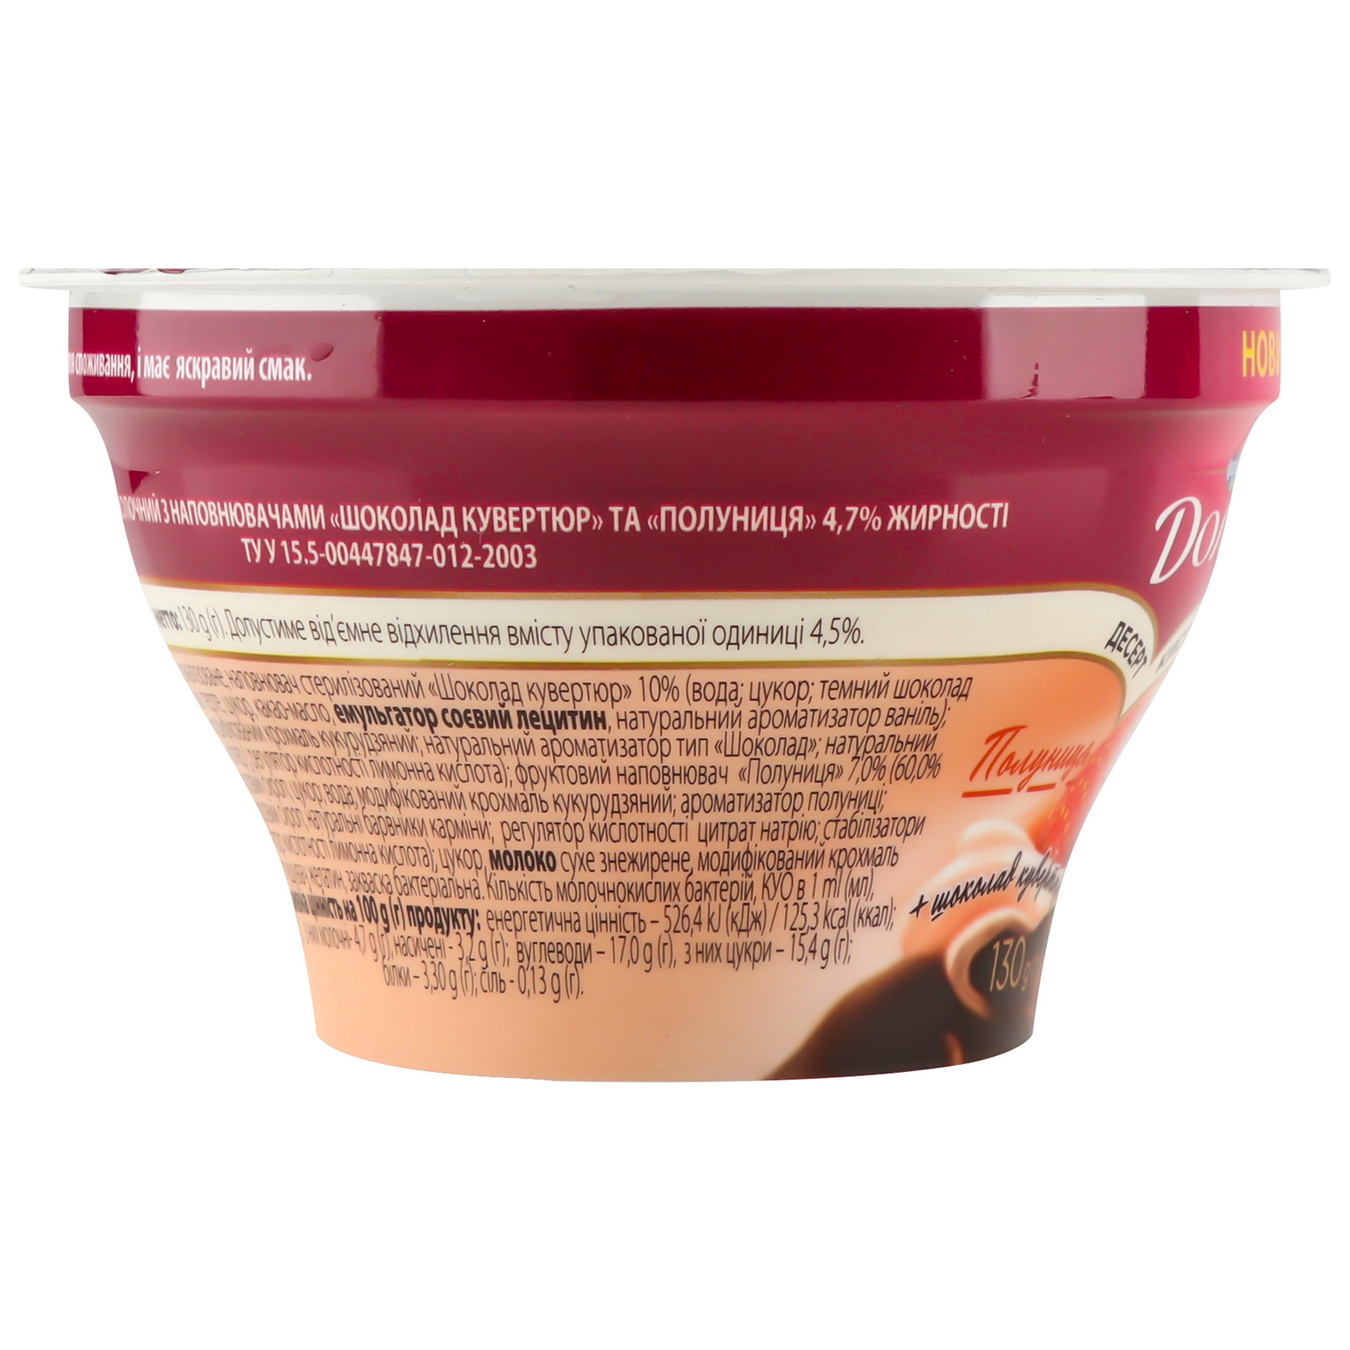 Dolce dessert with chocolate couverture and strawberry fillings cup 4.7% 130g 5